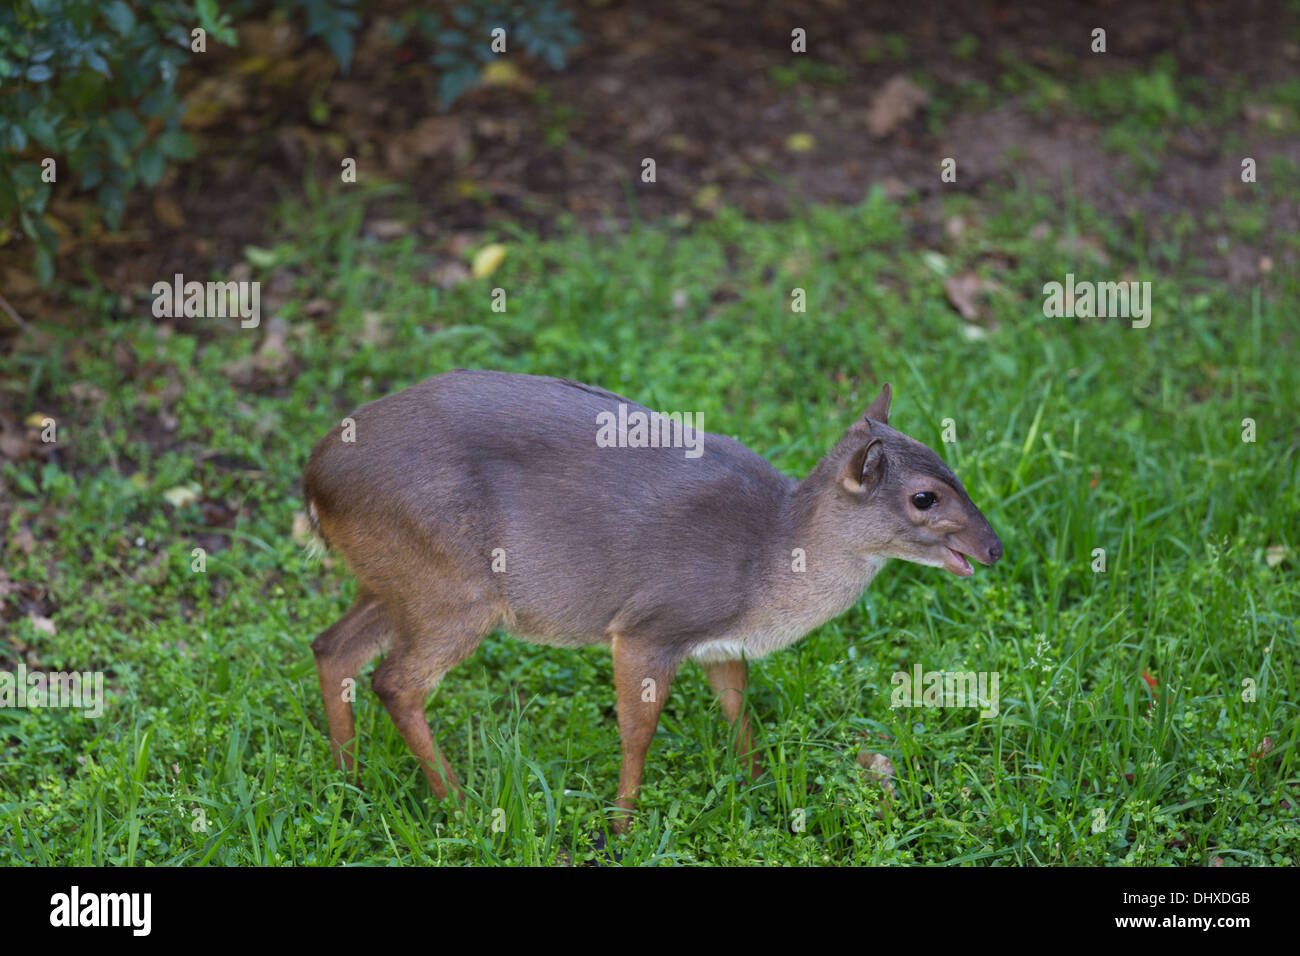 A blue duiker (cephalophus monticla) in Jeffreys Bay, Eastern Cape, South Africa. Stock Photo